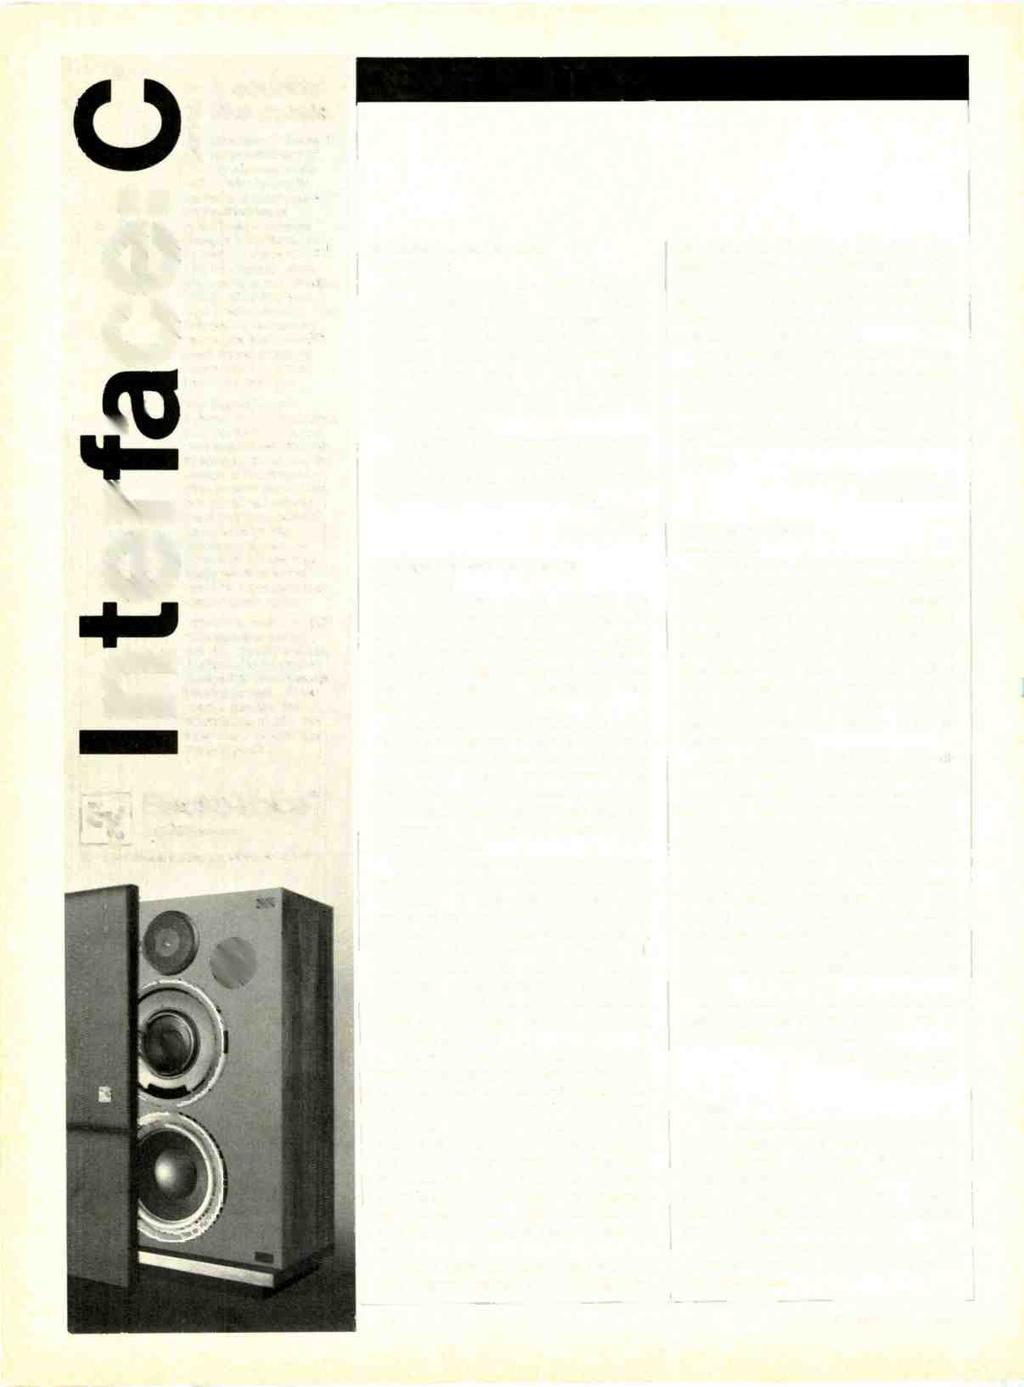 I AmericanRadioHistory.Com 0= It sounds If; like music. 5 Interface:C Series II N is the fulfillment of our six -year association with optimally vented speakers based on the theories of A.N.Thiele- speaker designs first introduced by Electro -Voice in 1973.